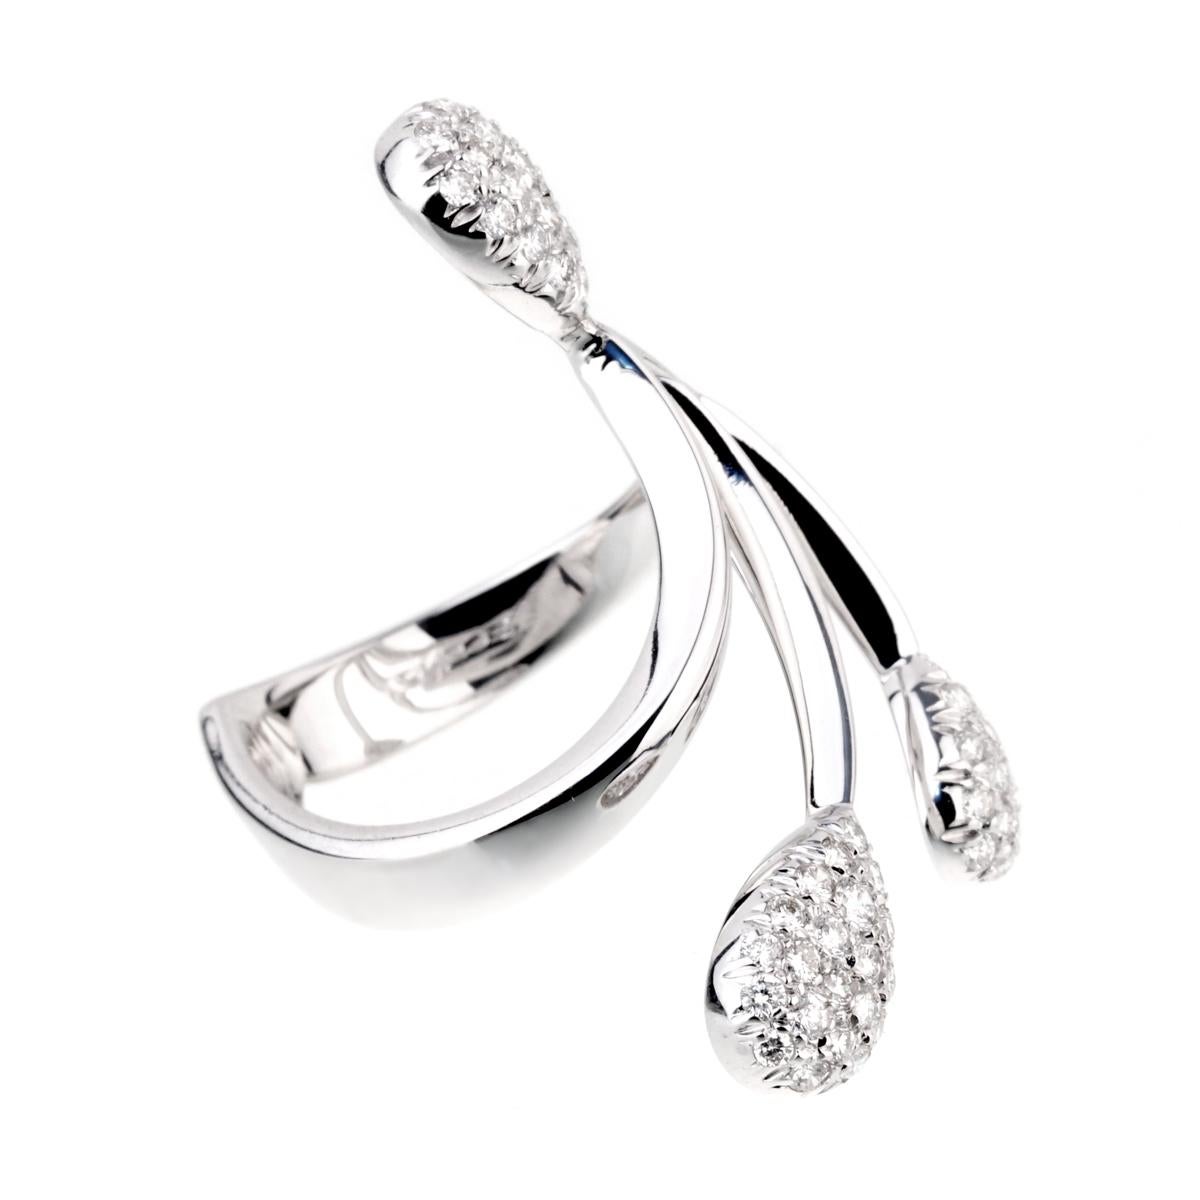 A chic Scavia diamond ring featuring round brilliant cut diamonds in 18k white gold. (
Size 4.75 Resizeable

Sku 0000969